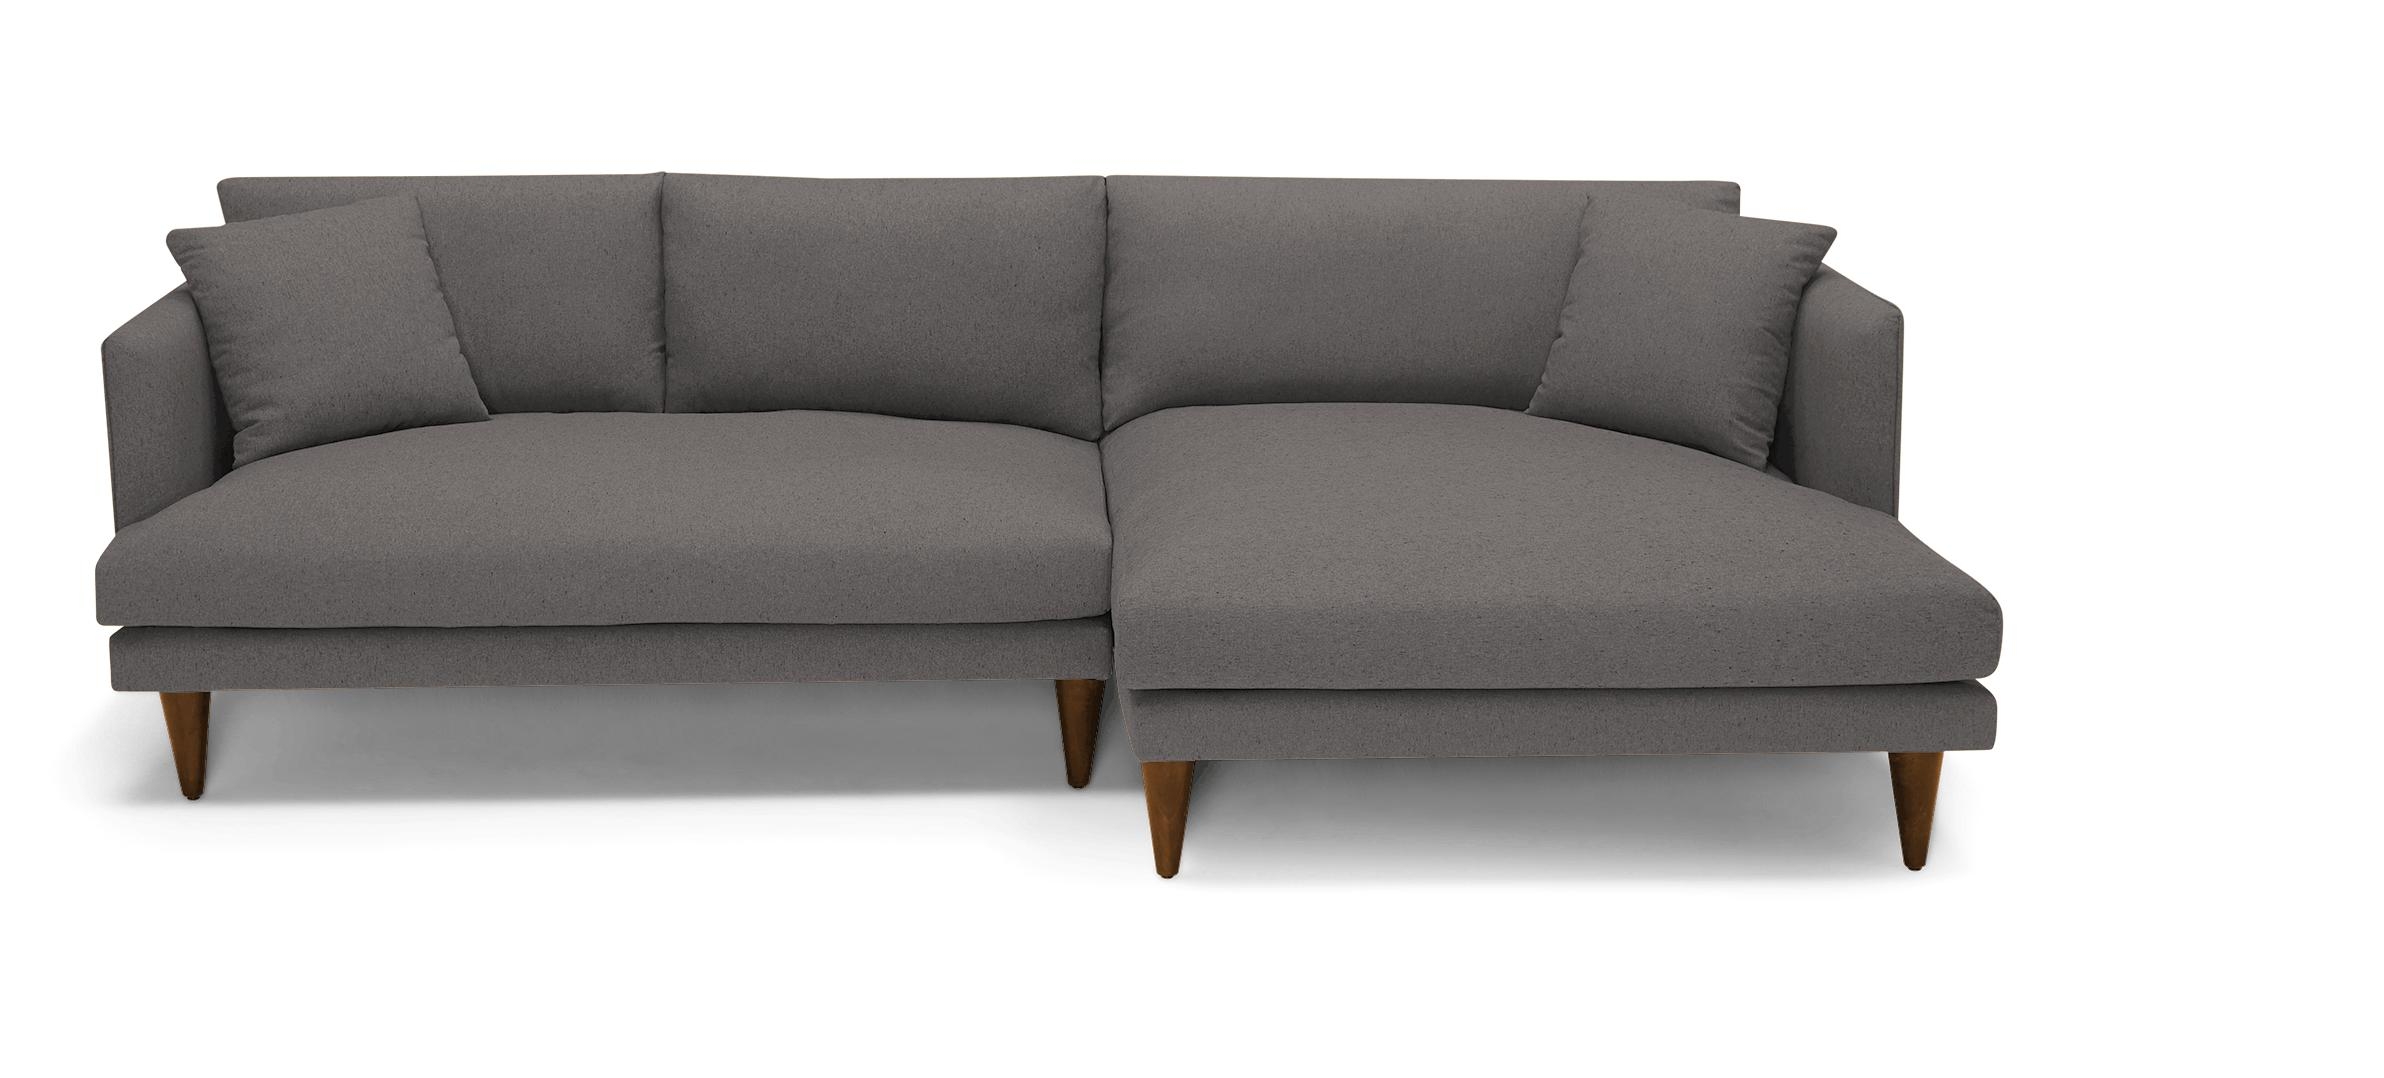 Gray Lewis Mid Century Modern Sectional - Cordova Eclipse - Mocha - Right - Cone - Image 0